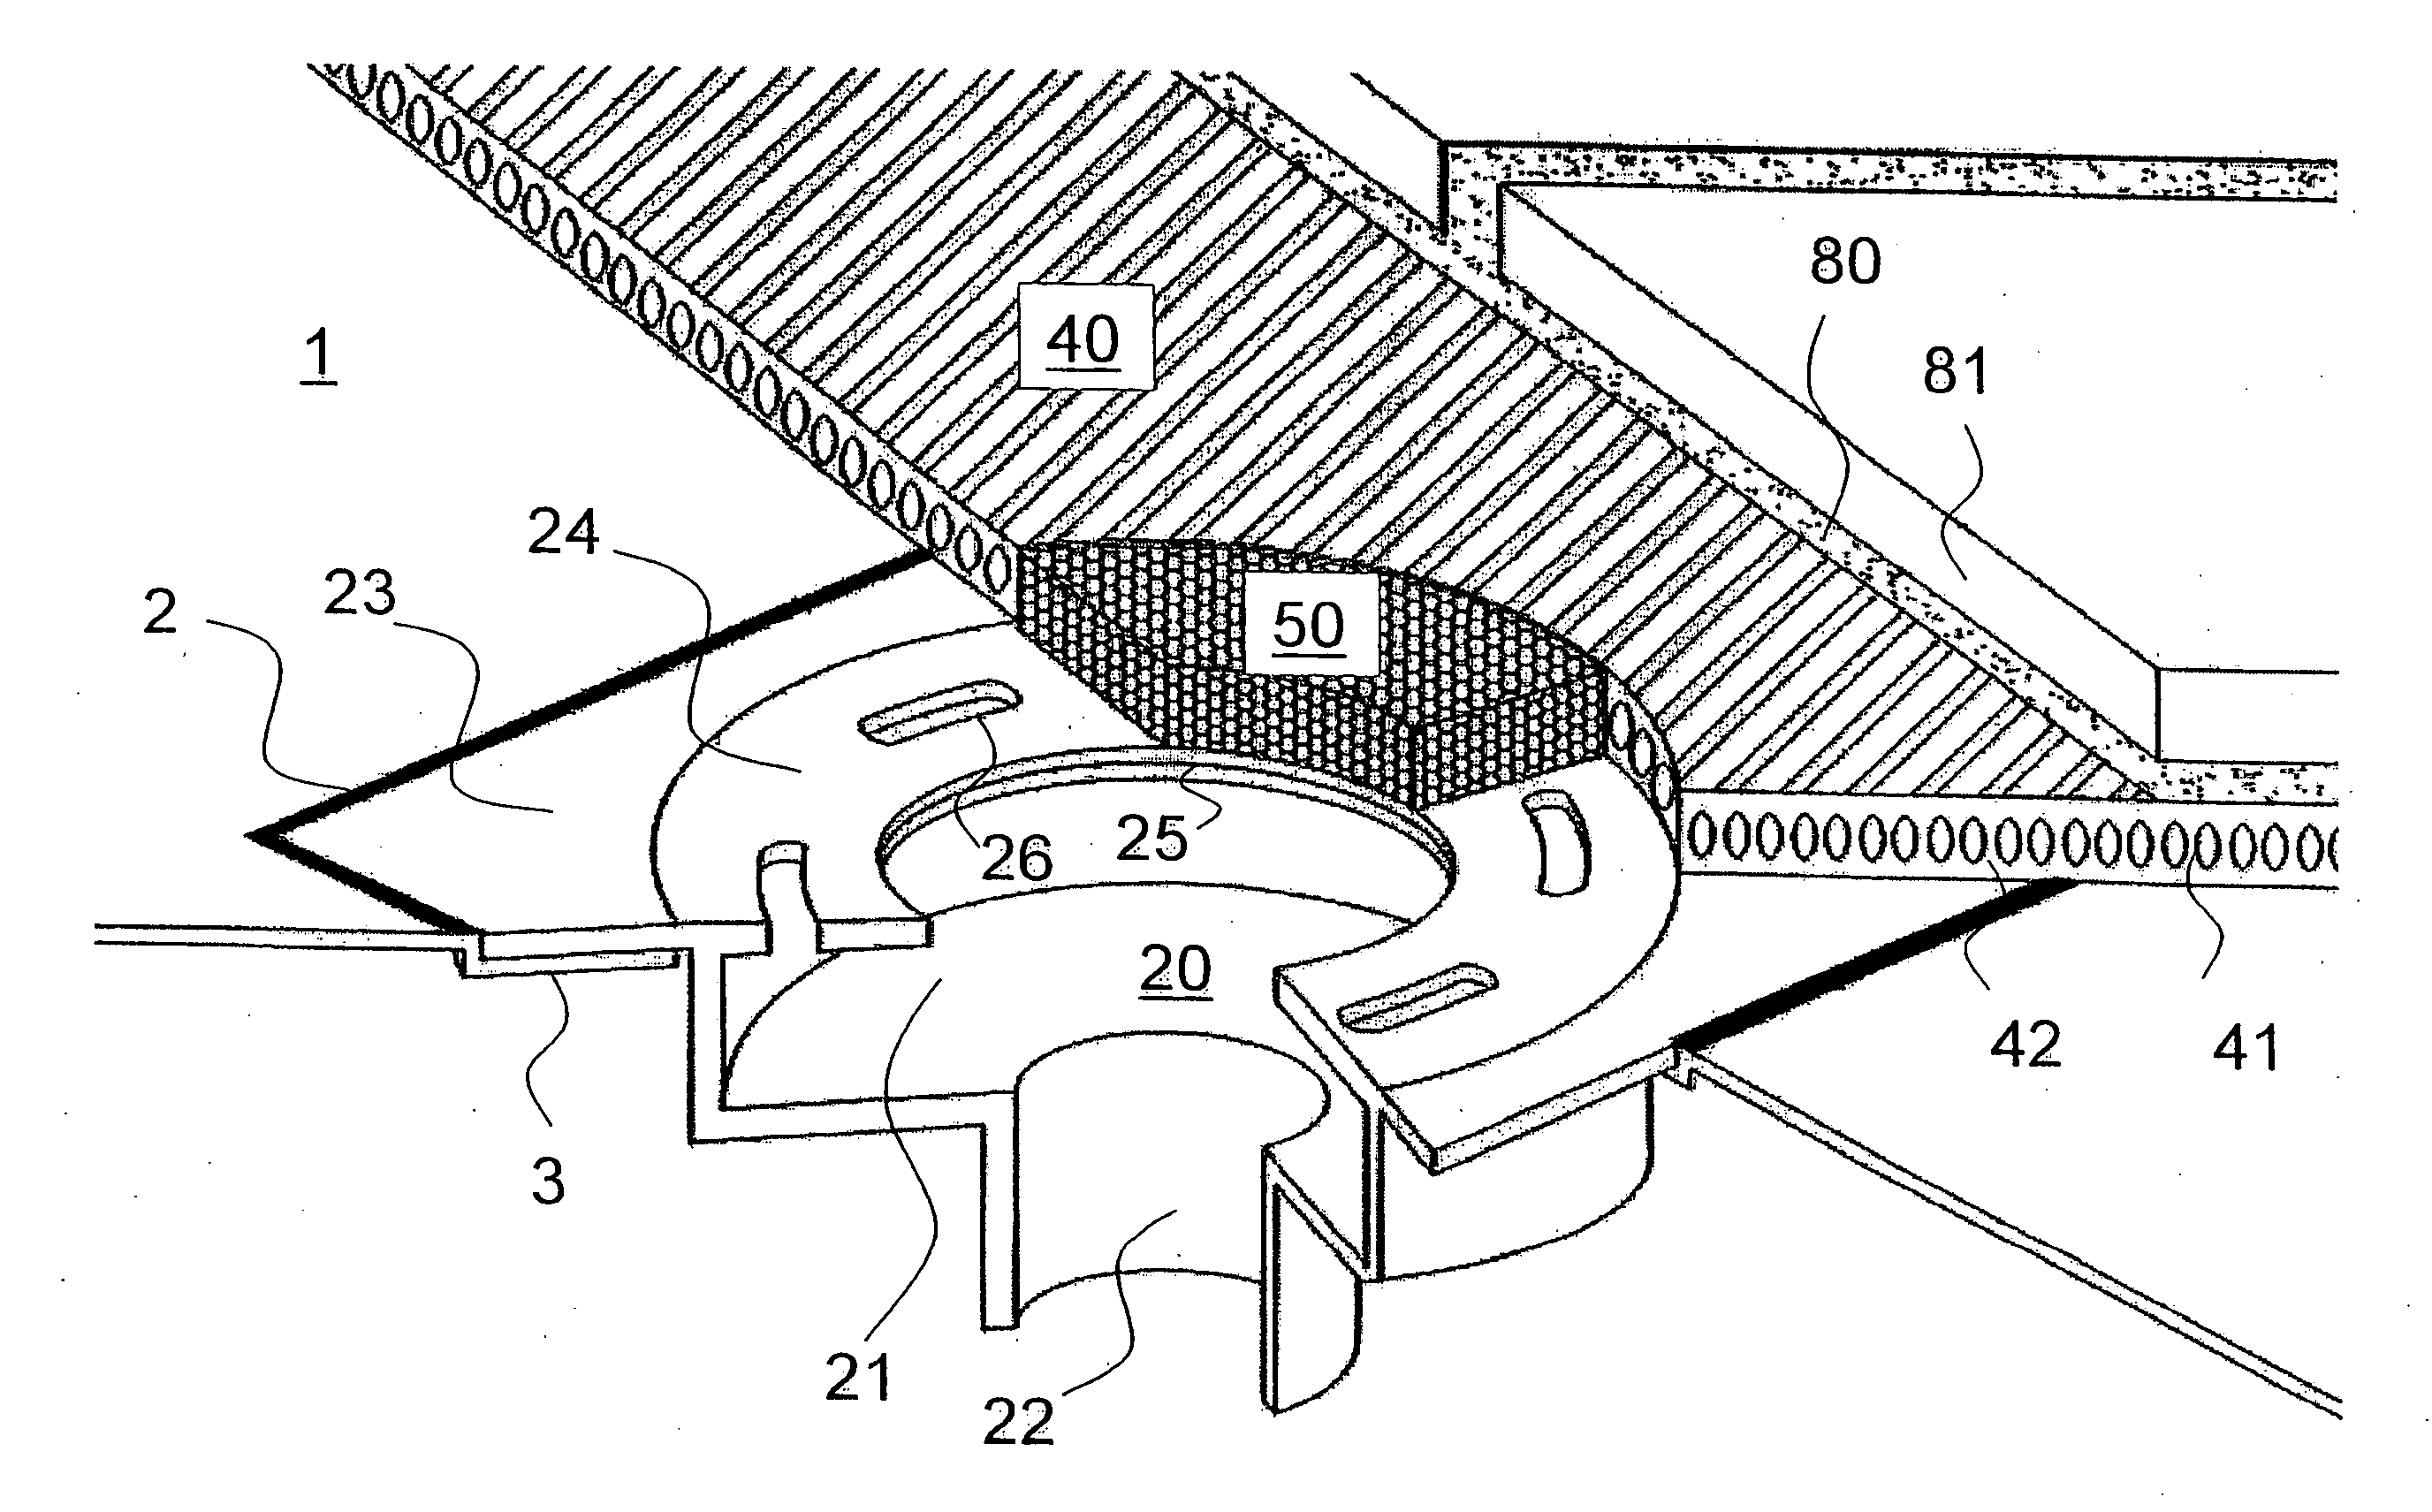 Shower pan drain assembly system